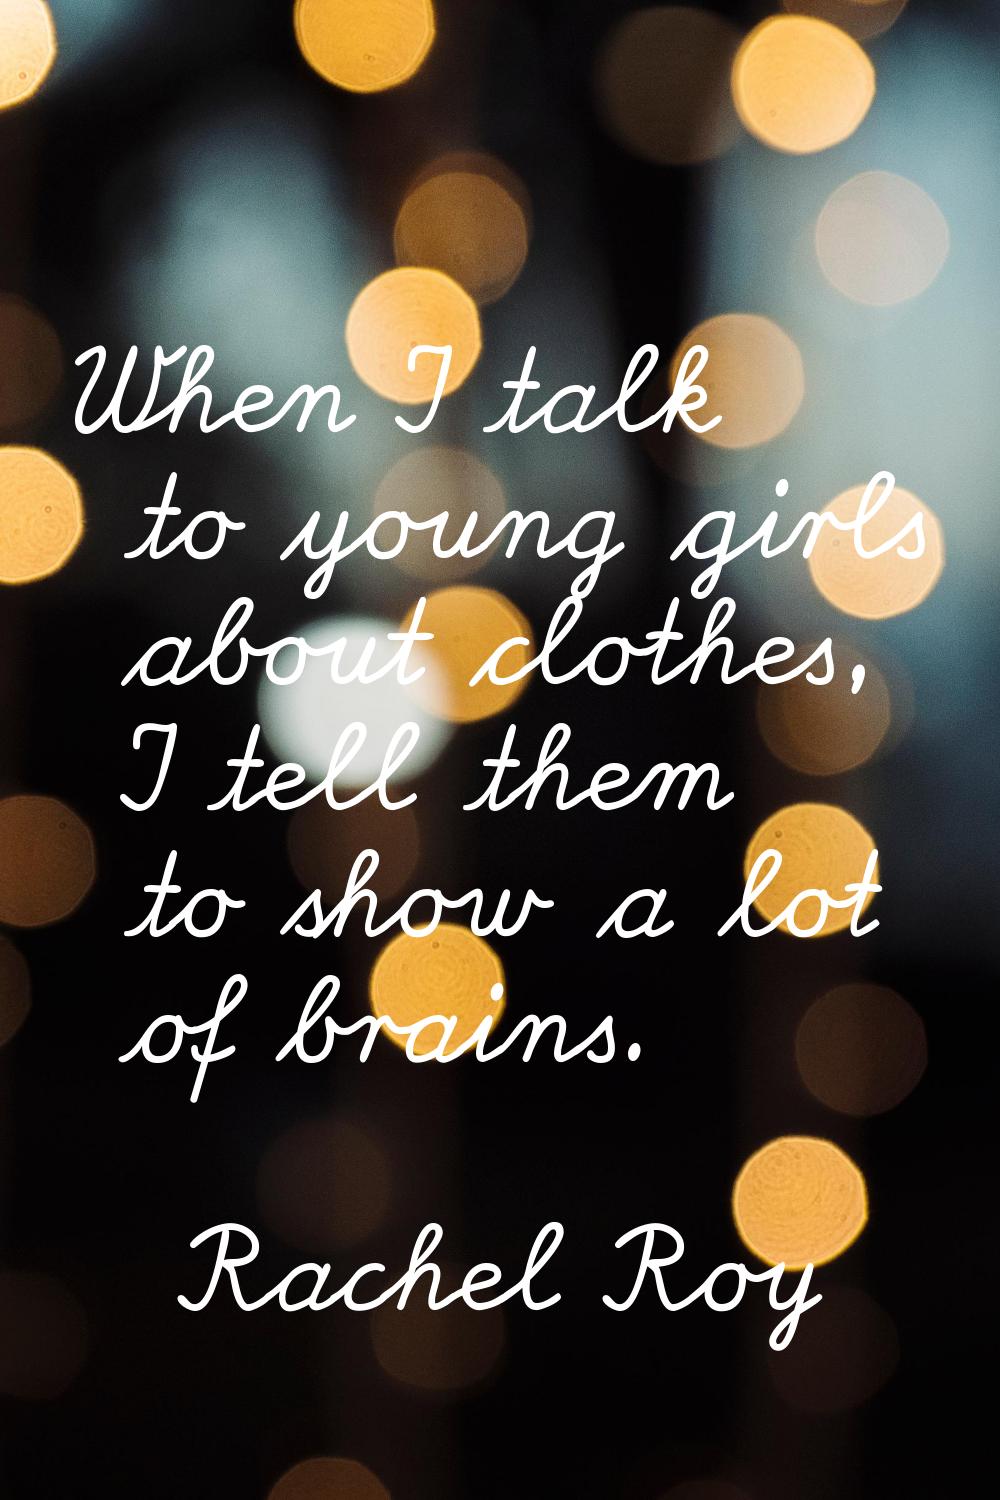 When I talk to young girls about clothes, I tell them to show a lot of brains.